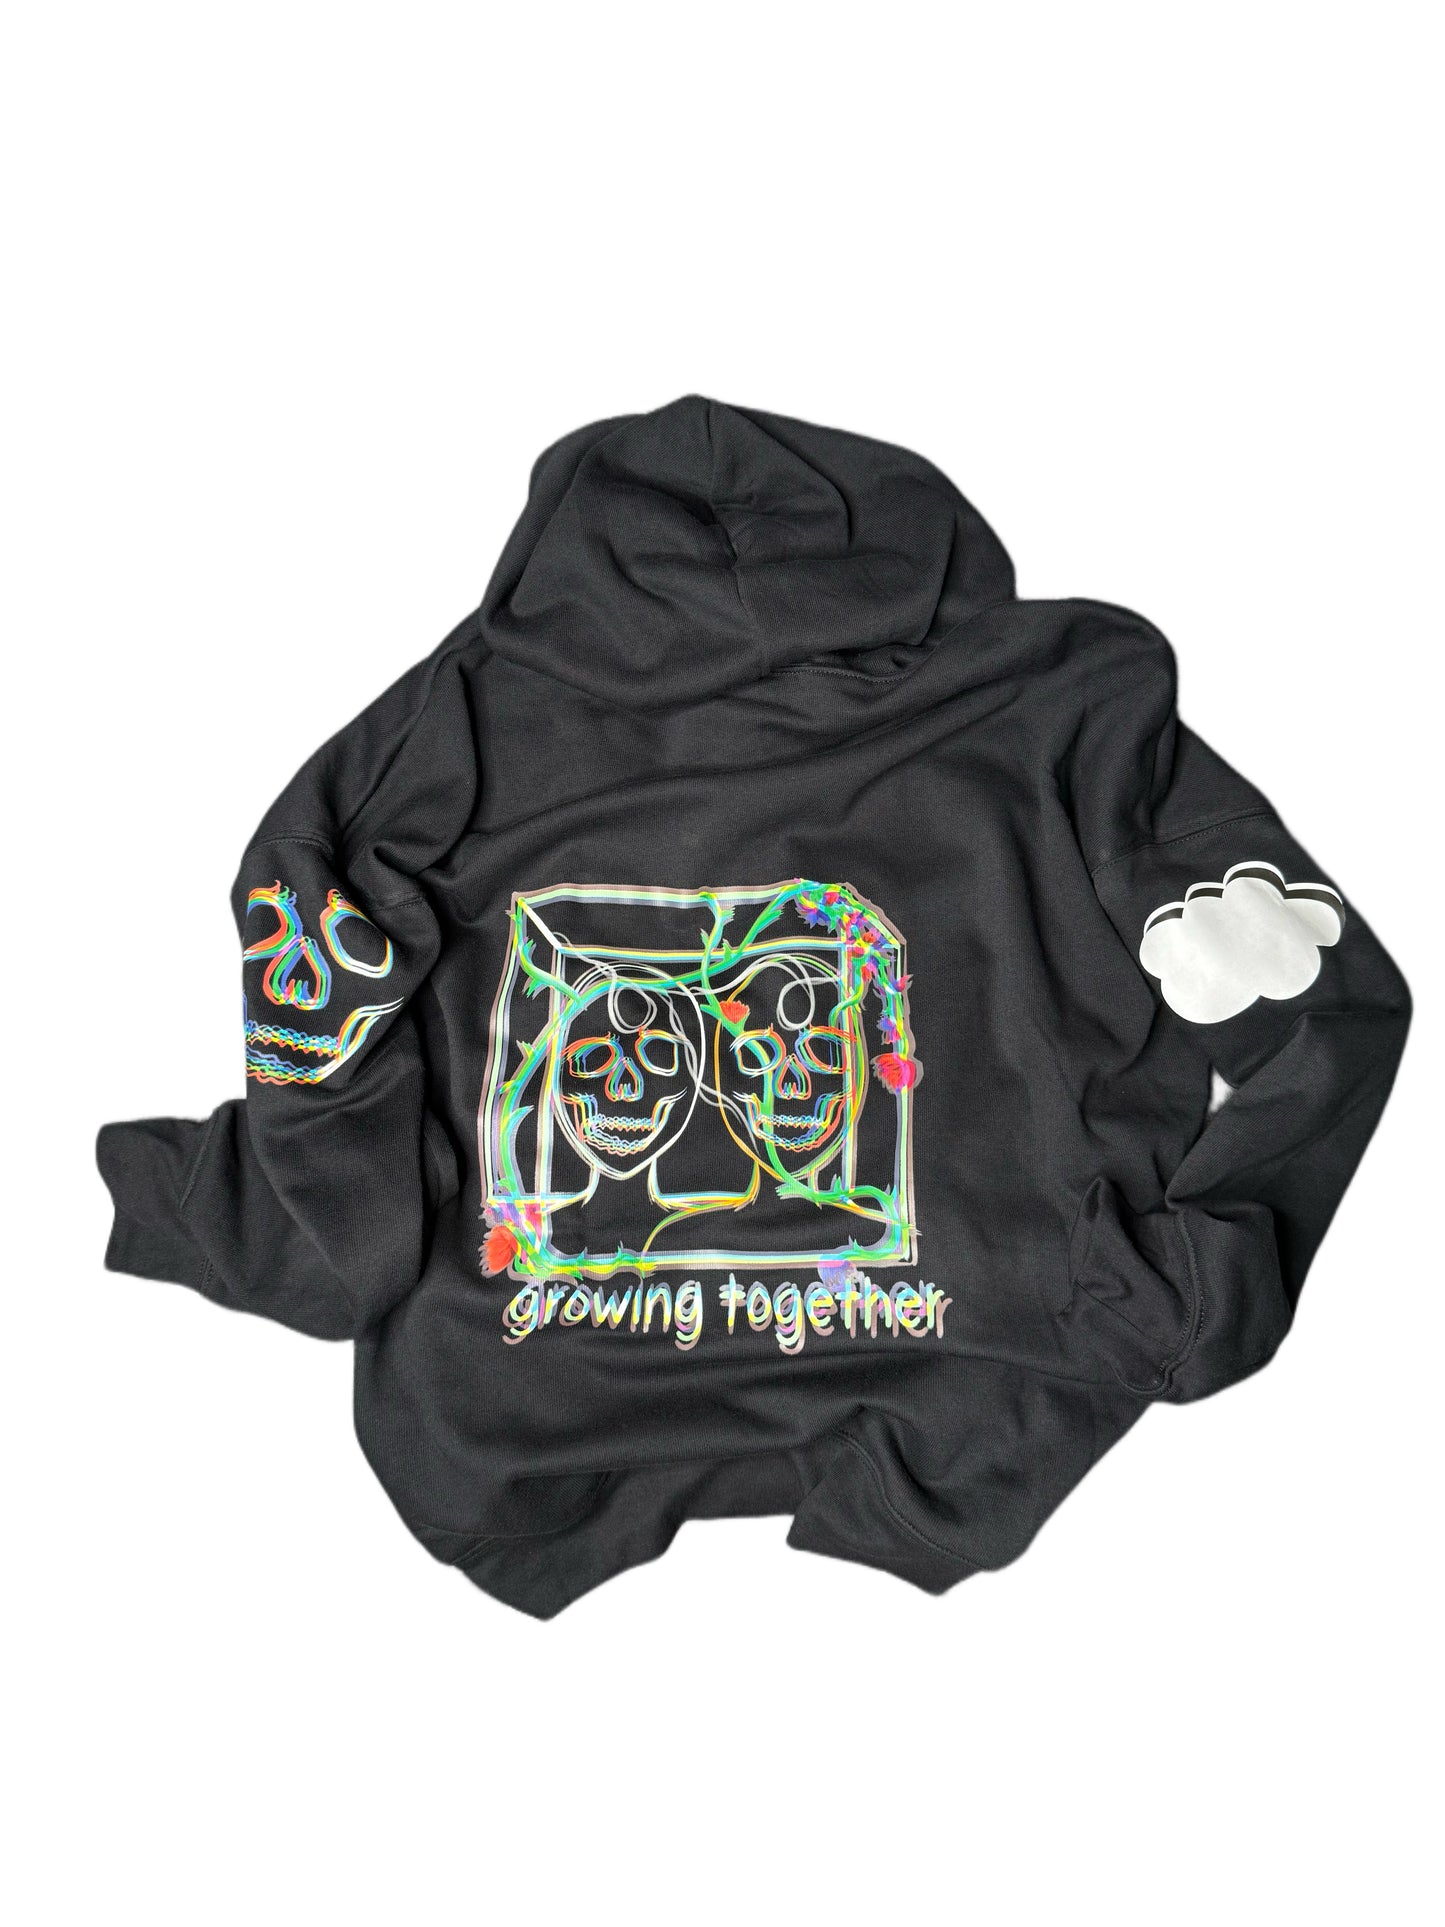 THE GROWING TOGETHER HOODIE - Unisex Lightweight Super Soft Slouchy Fit Edition PREORDER